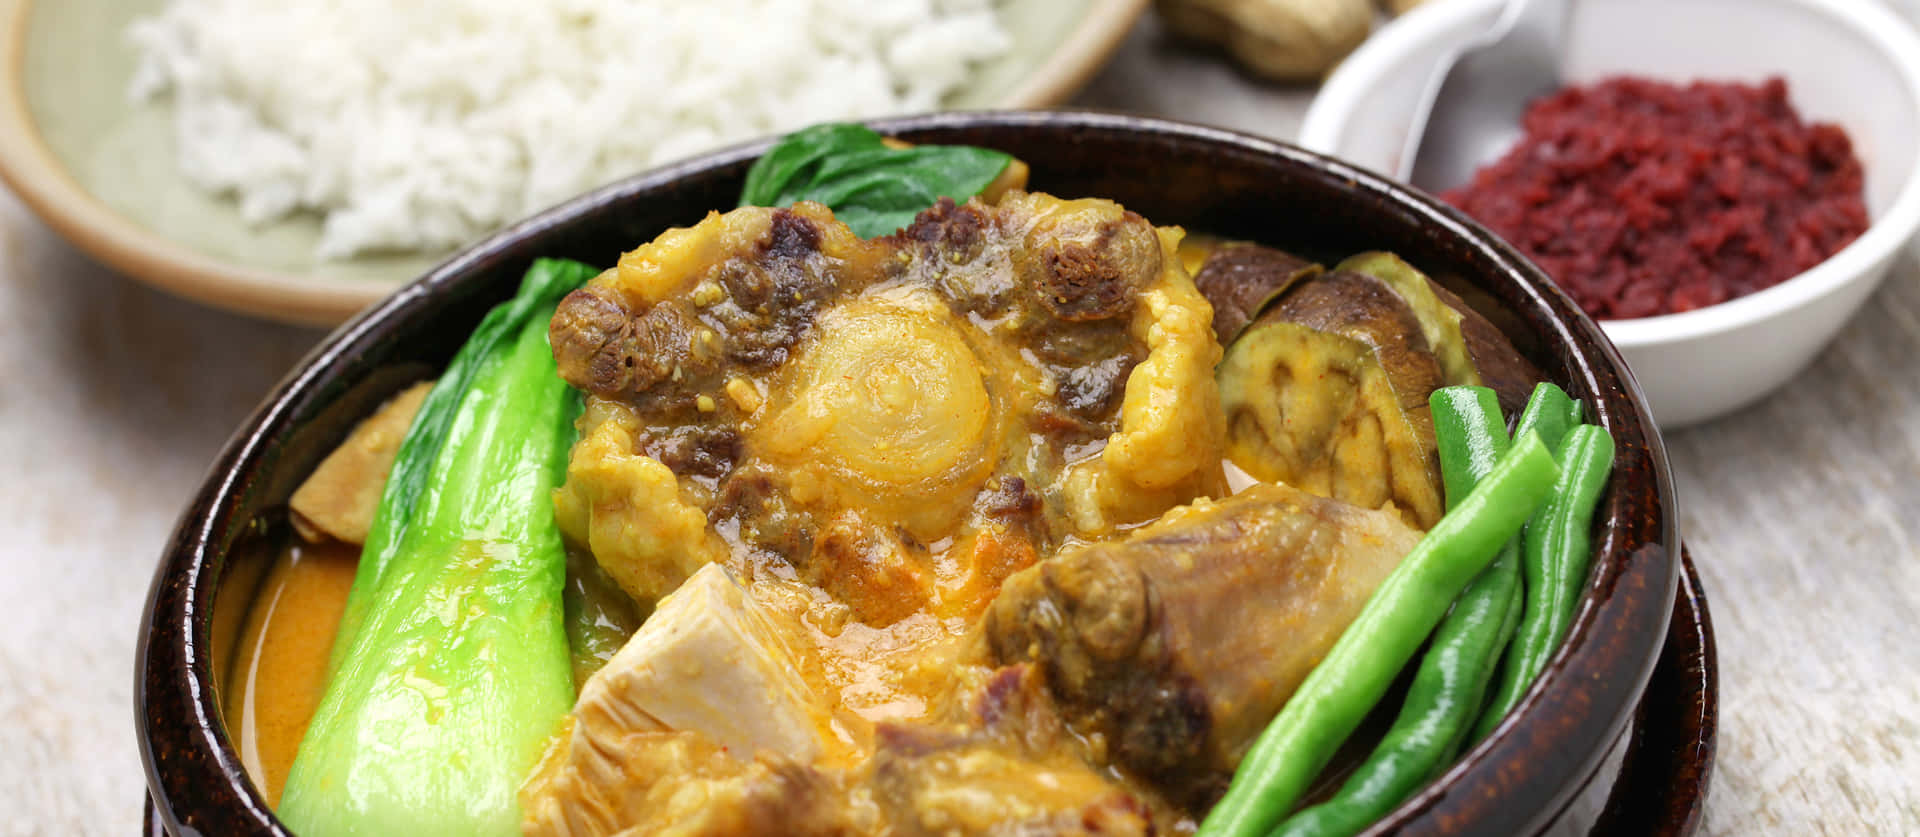 Sumptuous Meal With A Serving Of Rice And Kare-kare Wallpaper